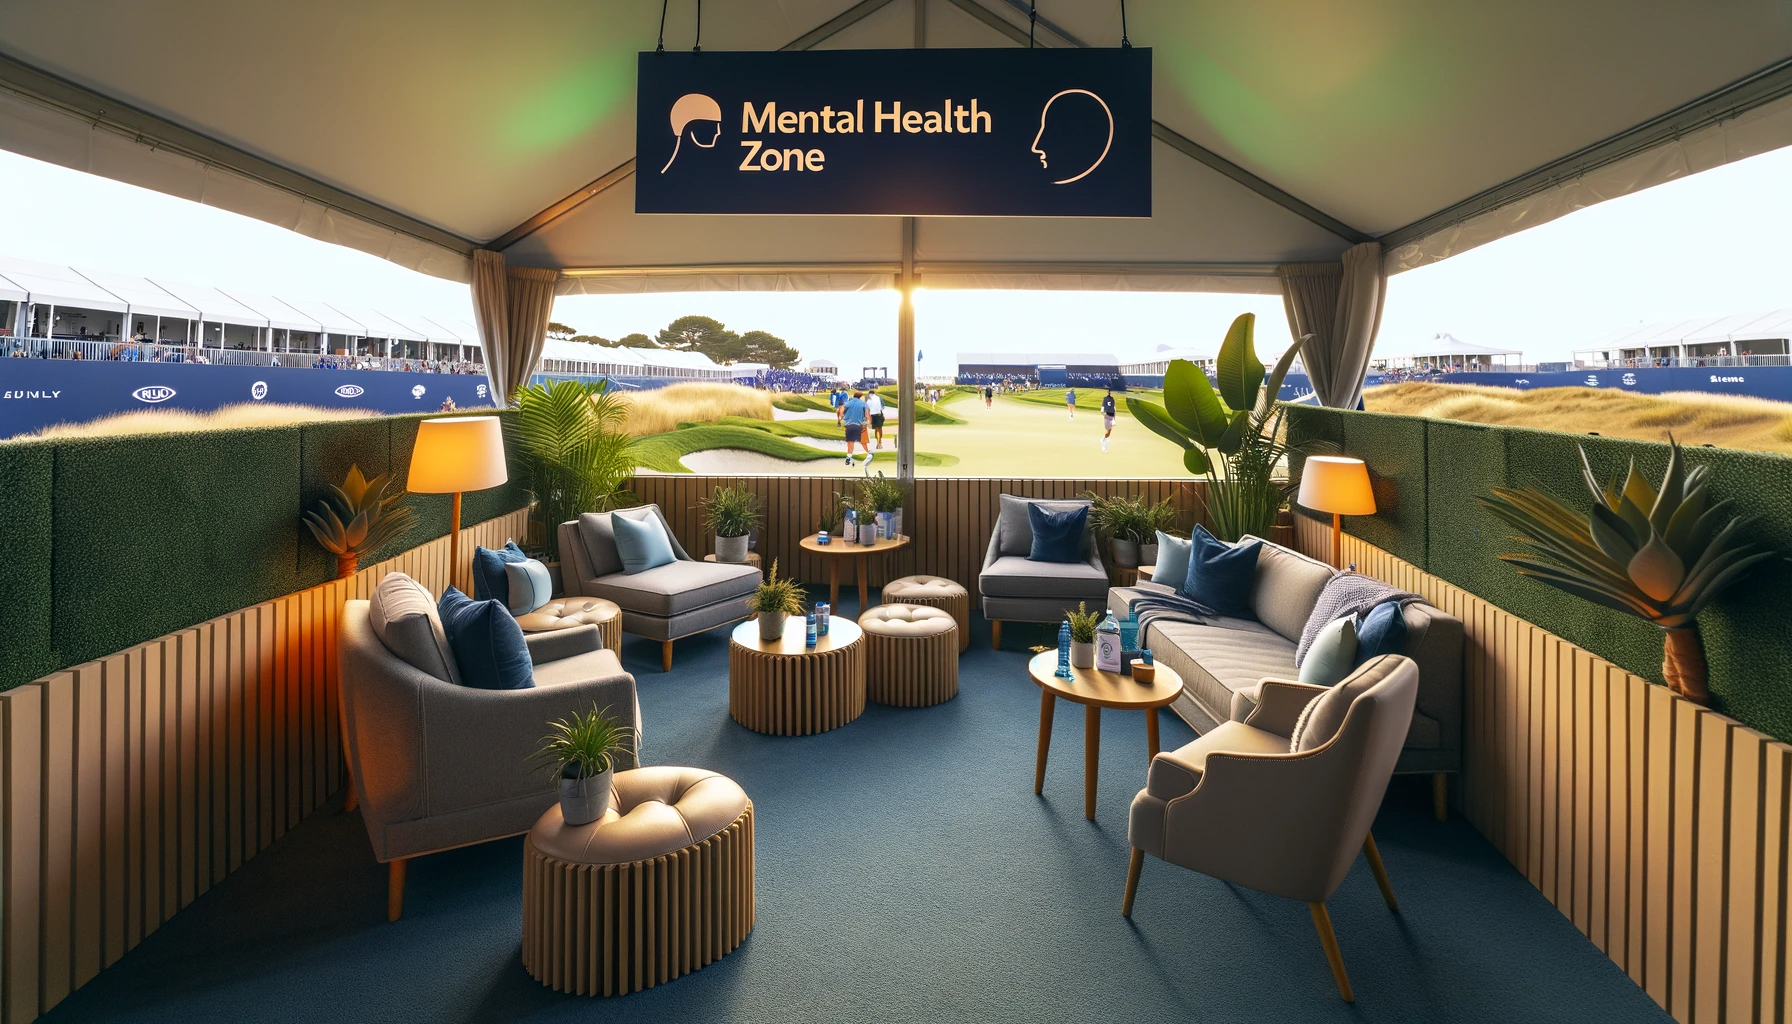 DALL·E 2024 01 07 17.13.39 A serene and welcoming mental health zone set up at a golf tournament featuring comfortable seating areas calming colors and subtle nature elements